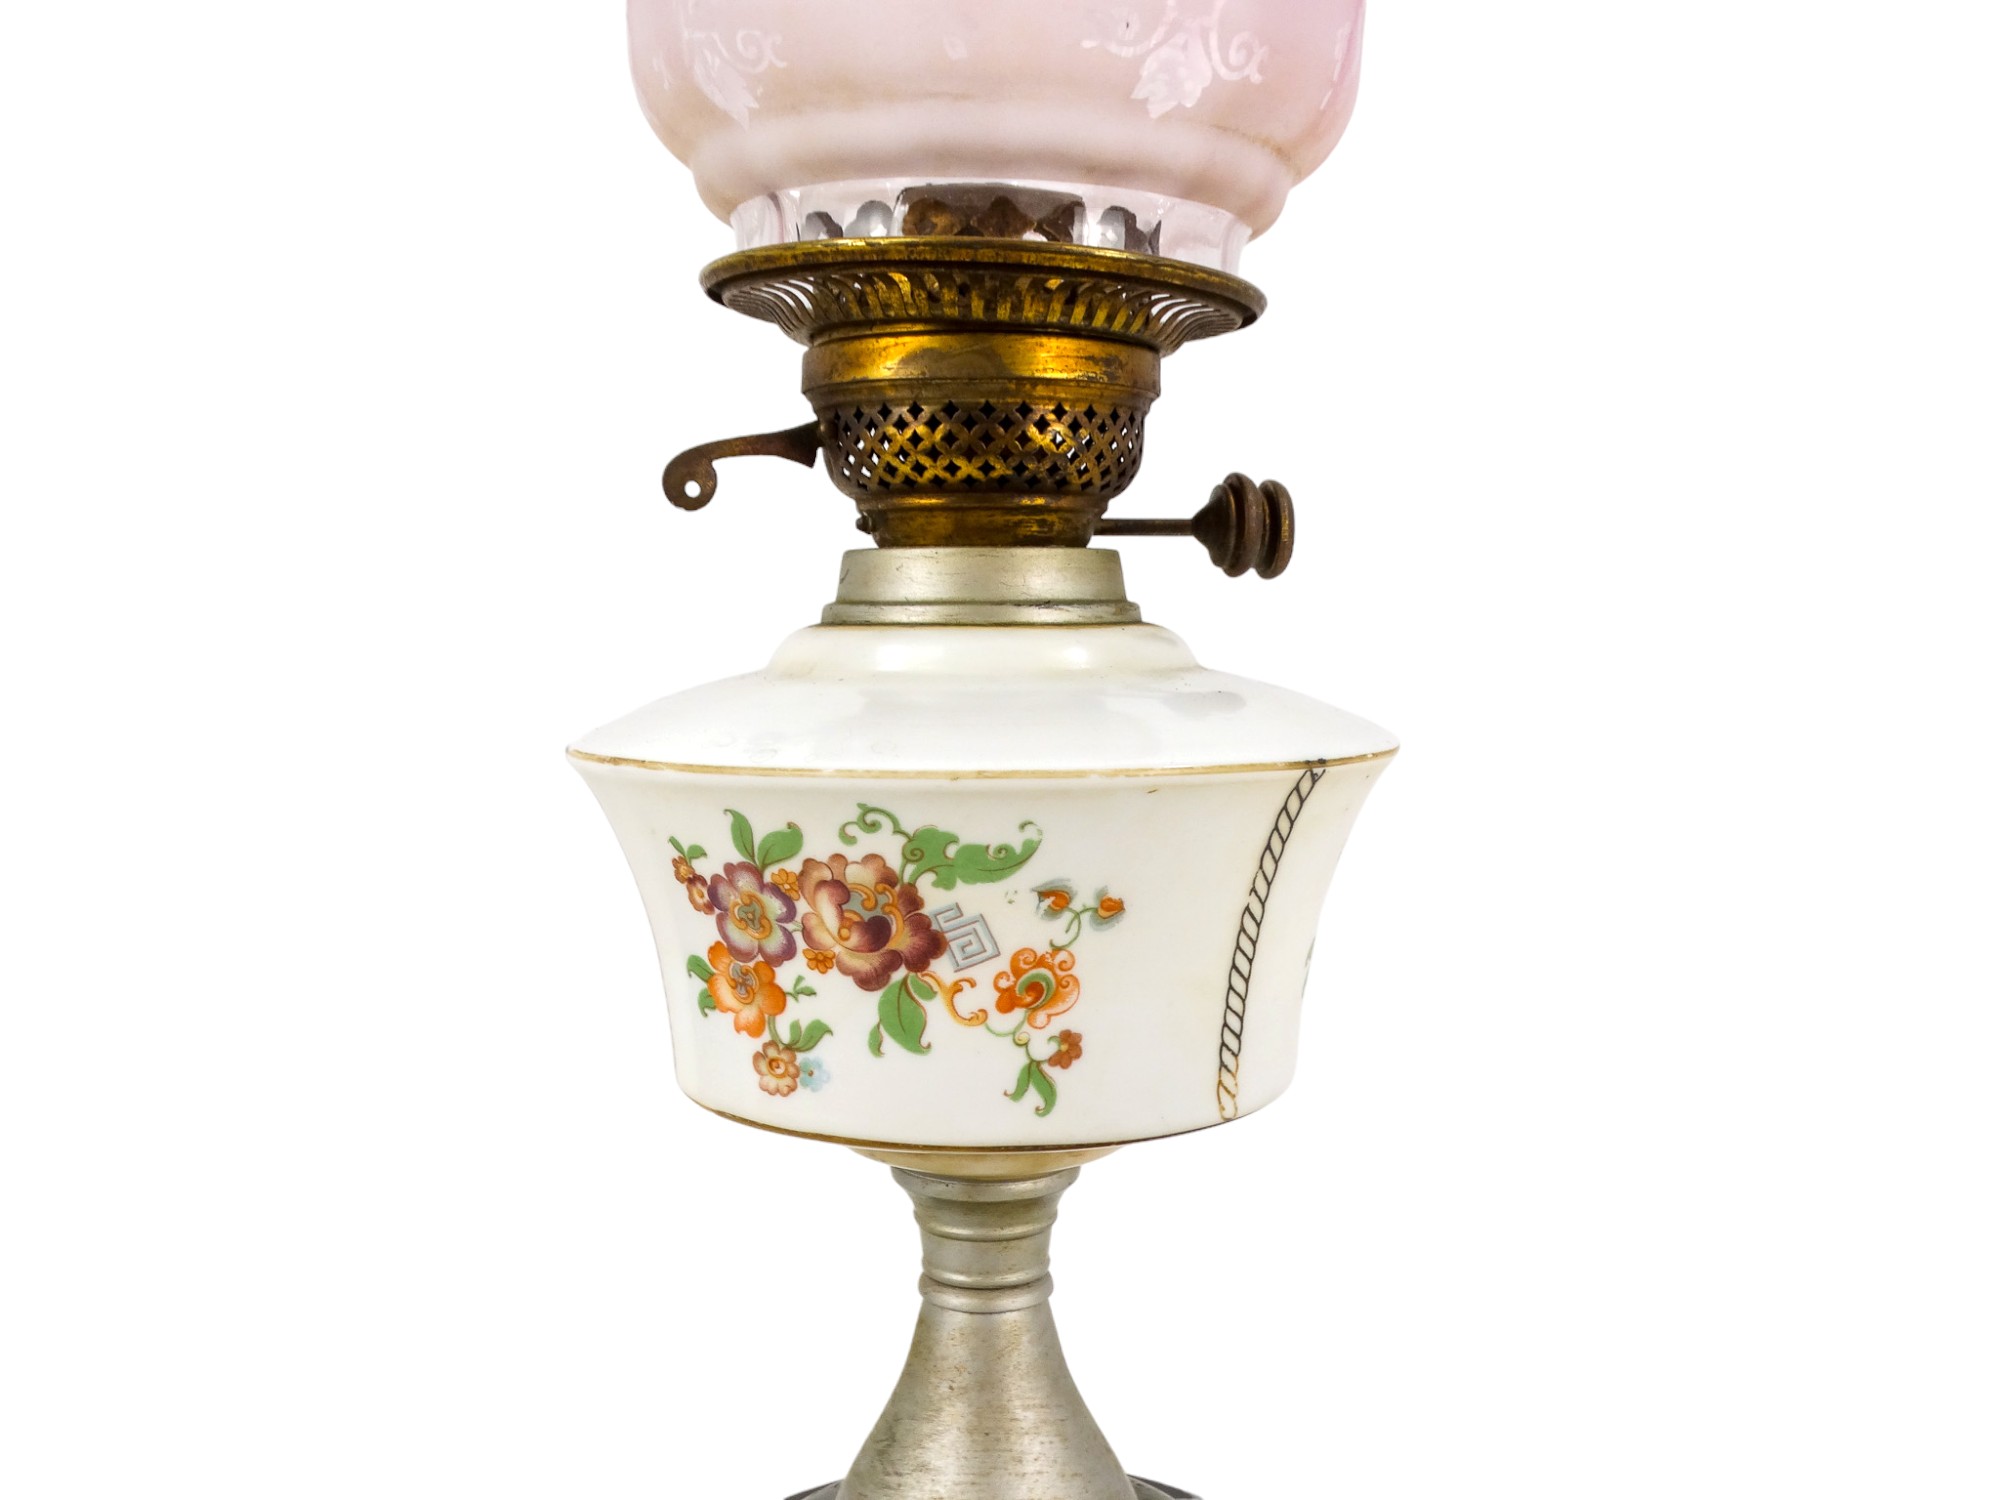 A late Victorian oil lamp - the milk glass reservoir decorated with flowers and an etched glass - Image 5 of 8